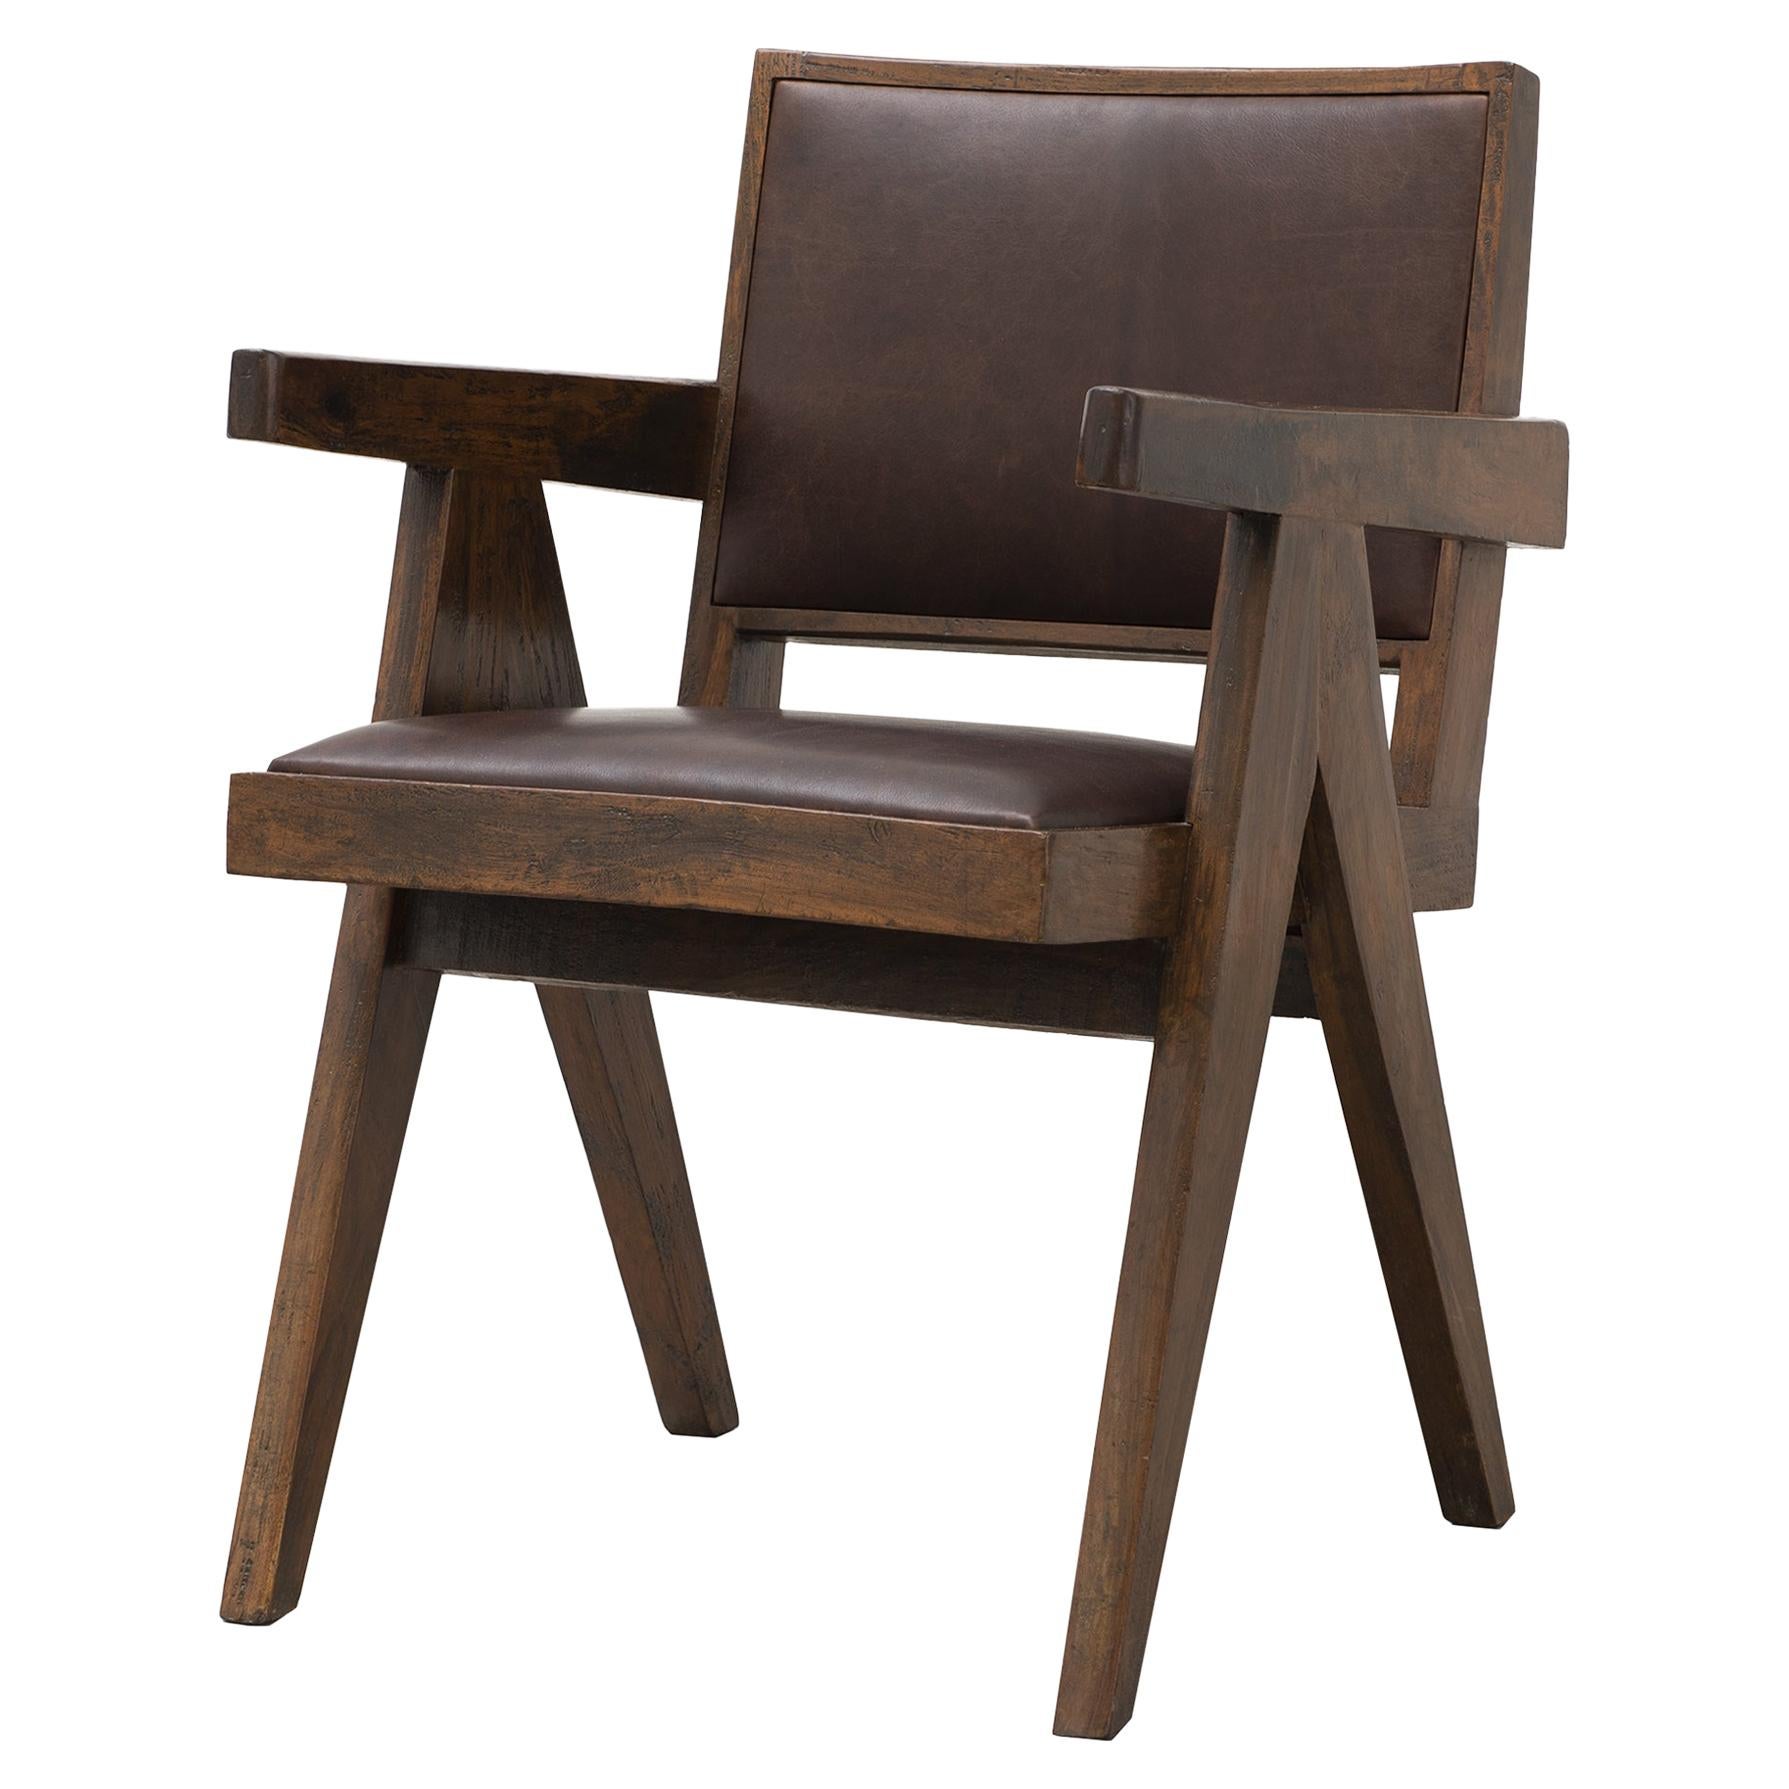 Pierre Jeanneret, "Office" Chair, circa 1955-1956 For Sale